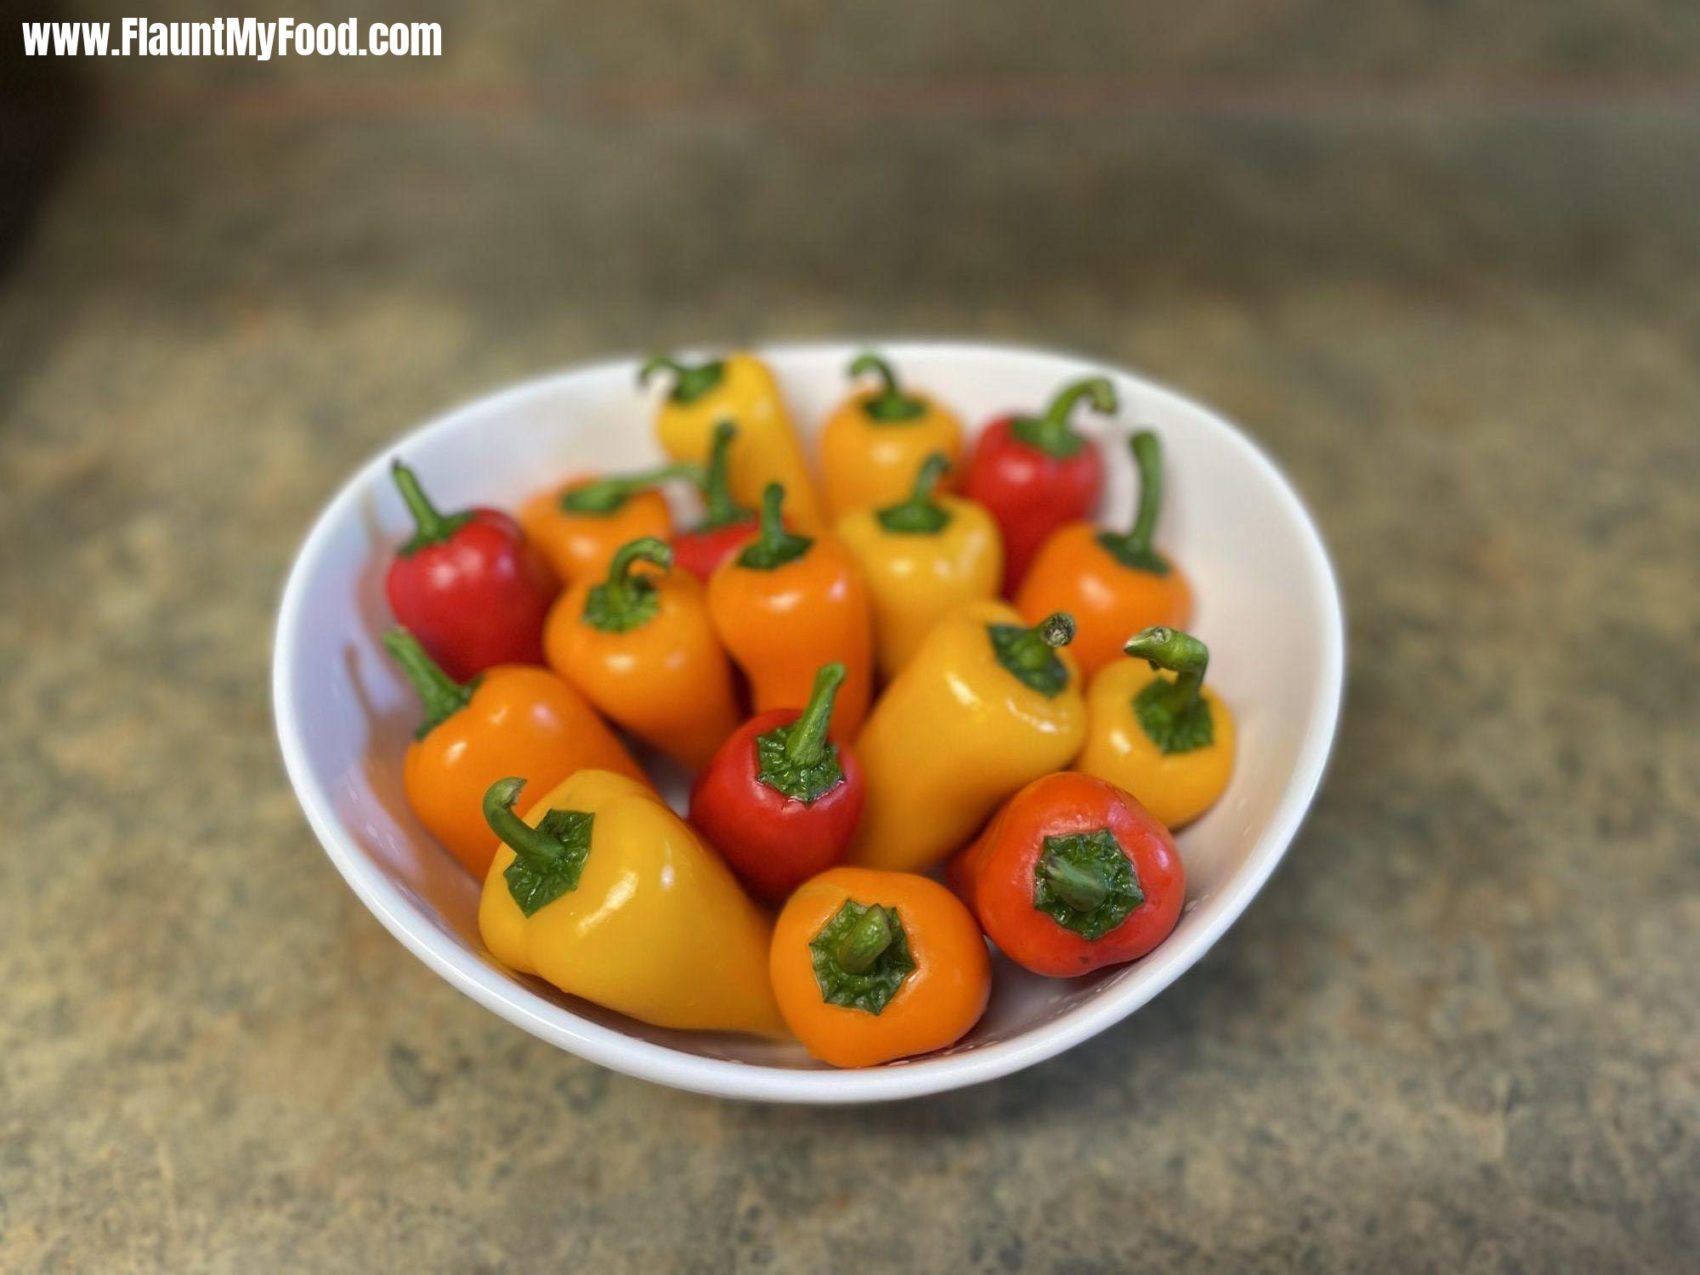 Mini colorful peppers for a great evening healthy treat and snack for a together